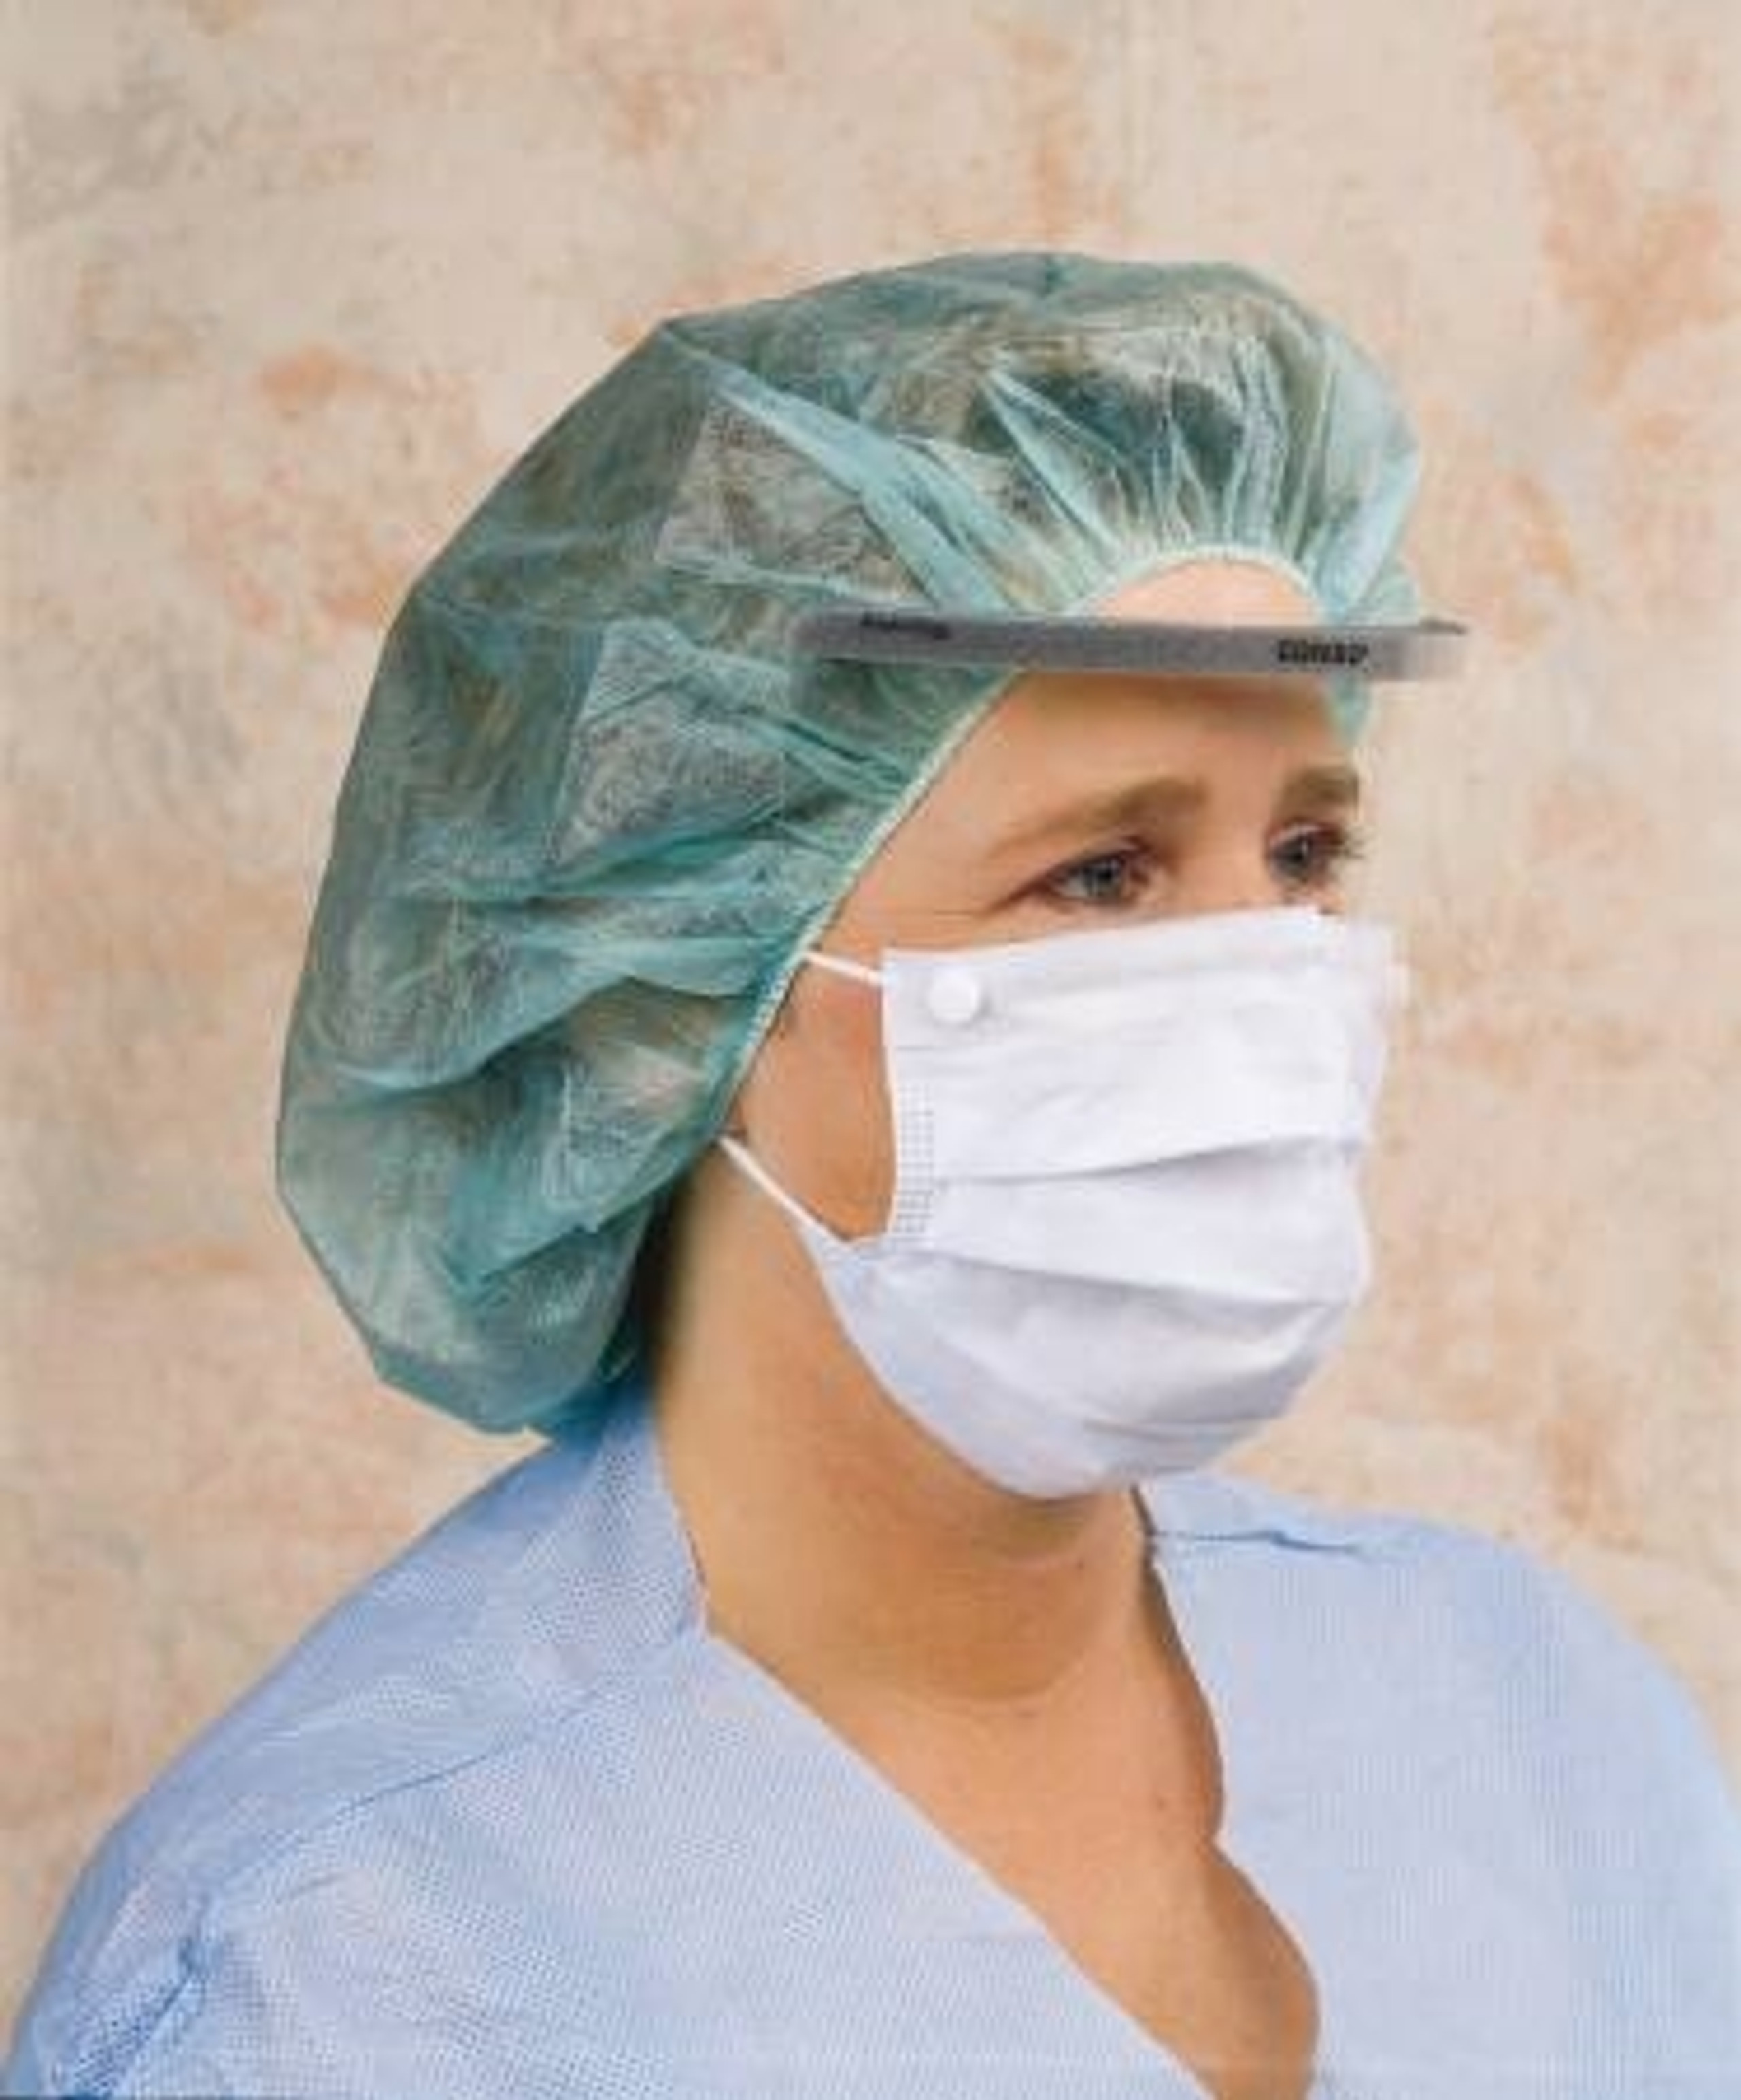 Mckesson Surgical Mask With Eye Shield 5942